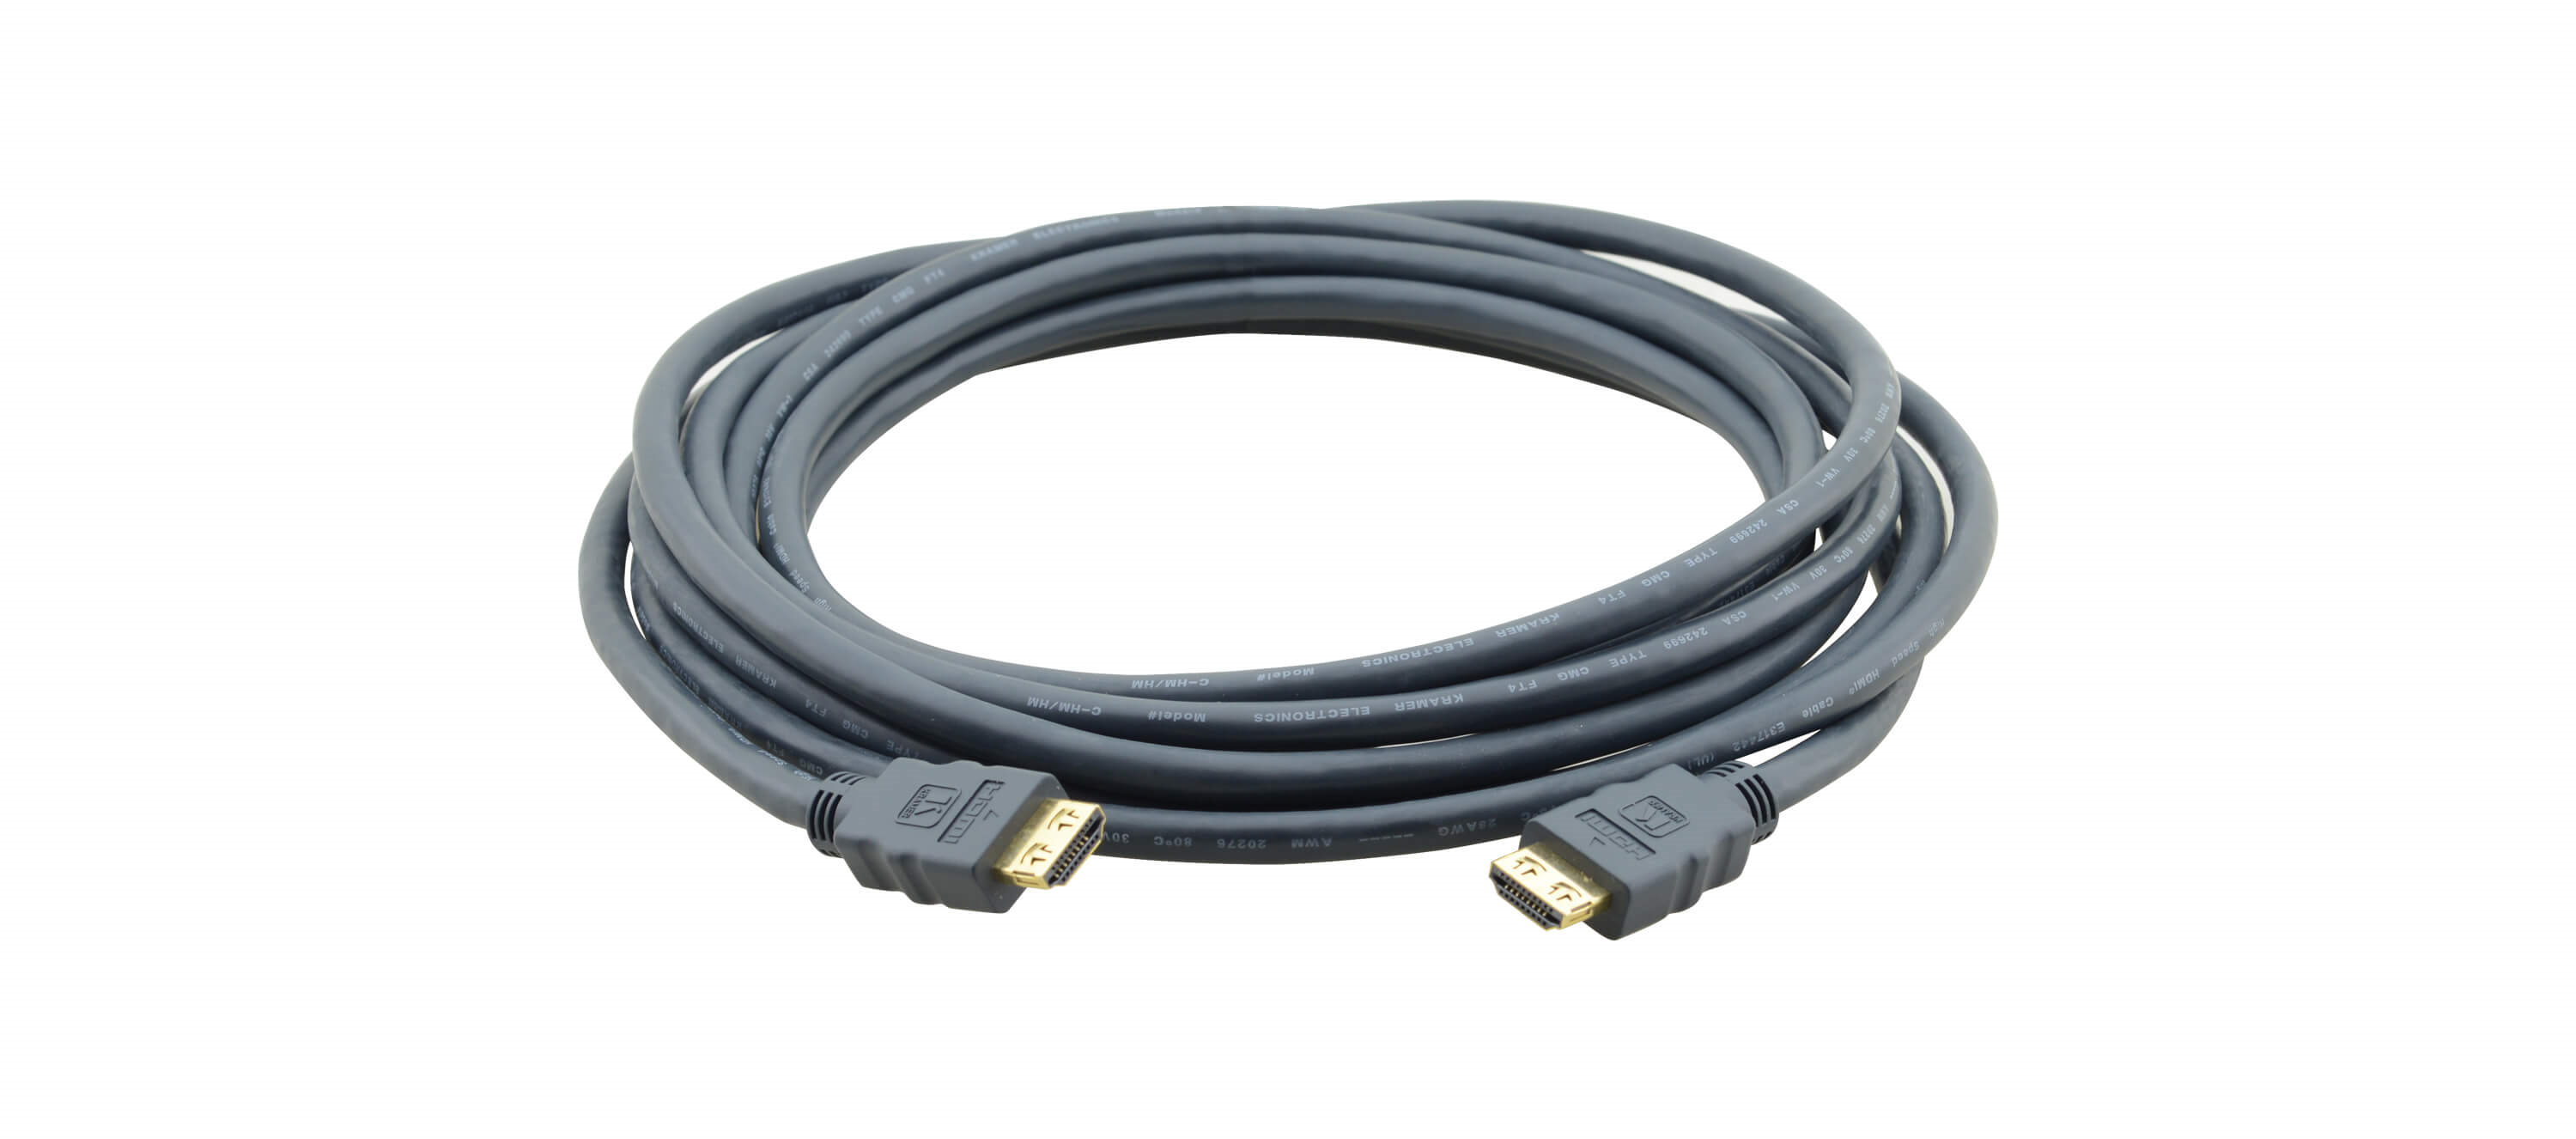 C-HM/HM/ETH-6 High–Speed HDMI Cable with Ethernet - 6'